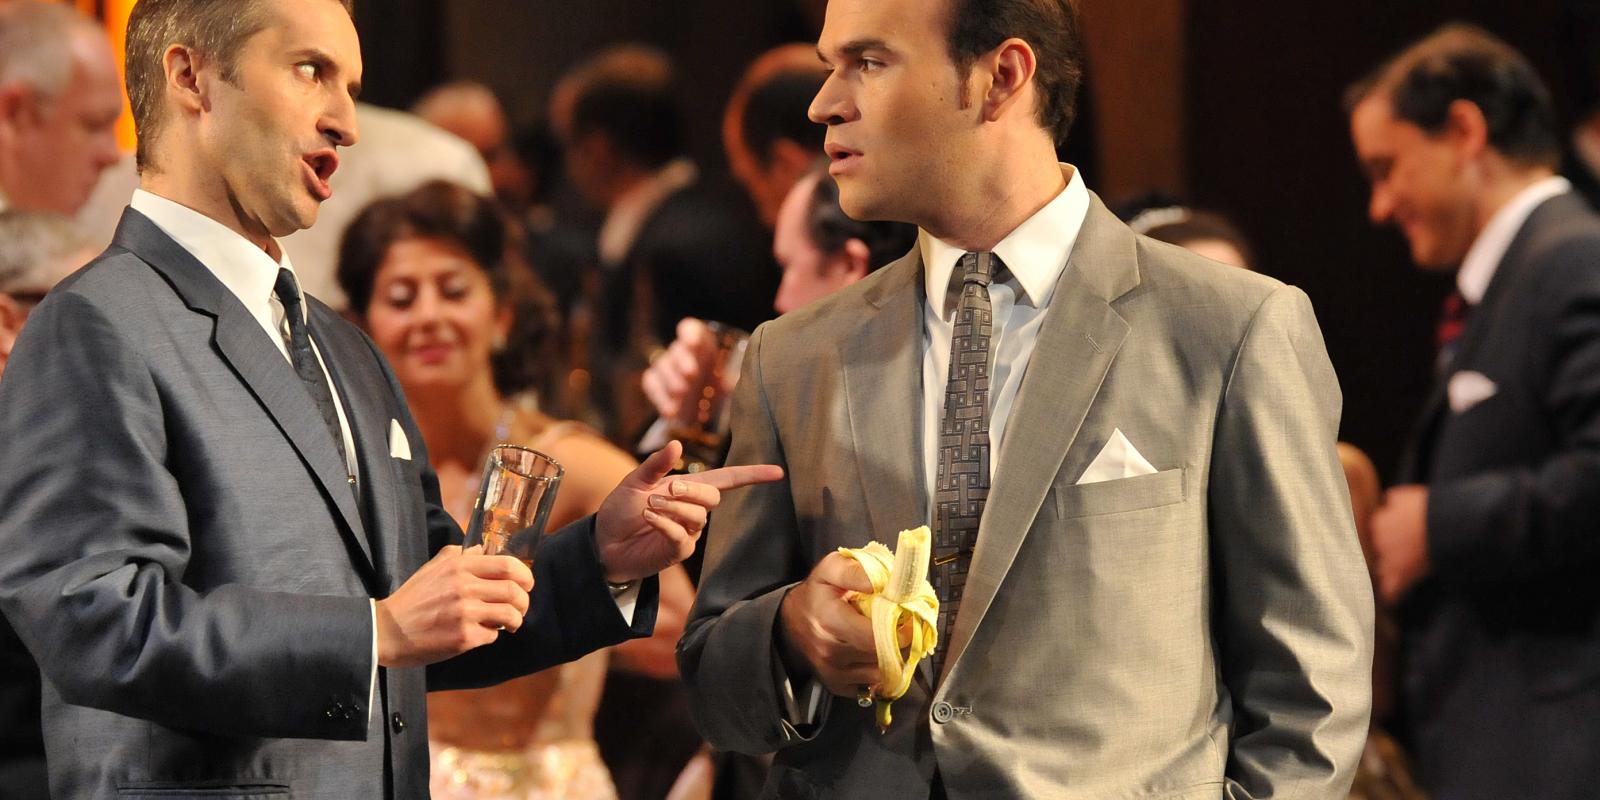 one man drinking and another eating a banana as part of ENO's Rigoletto